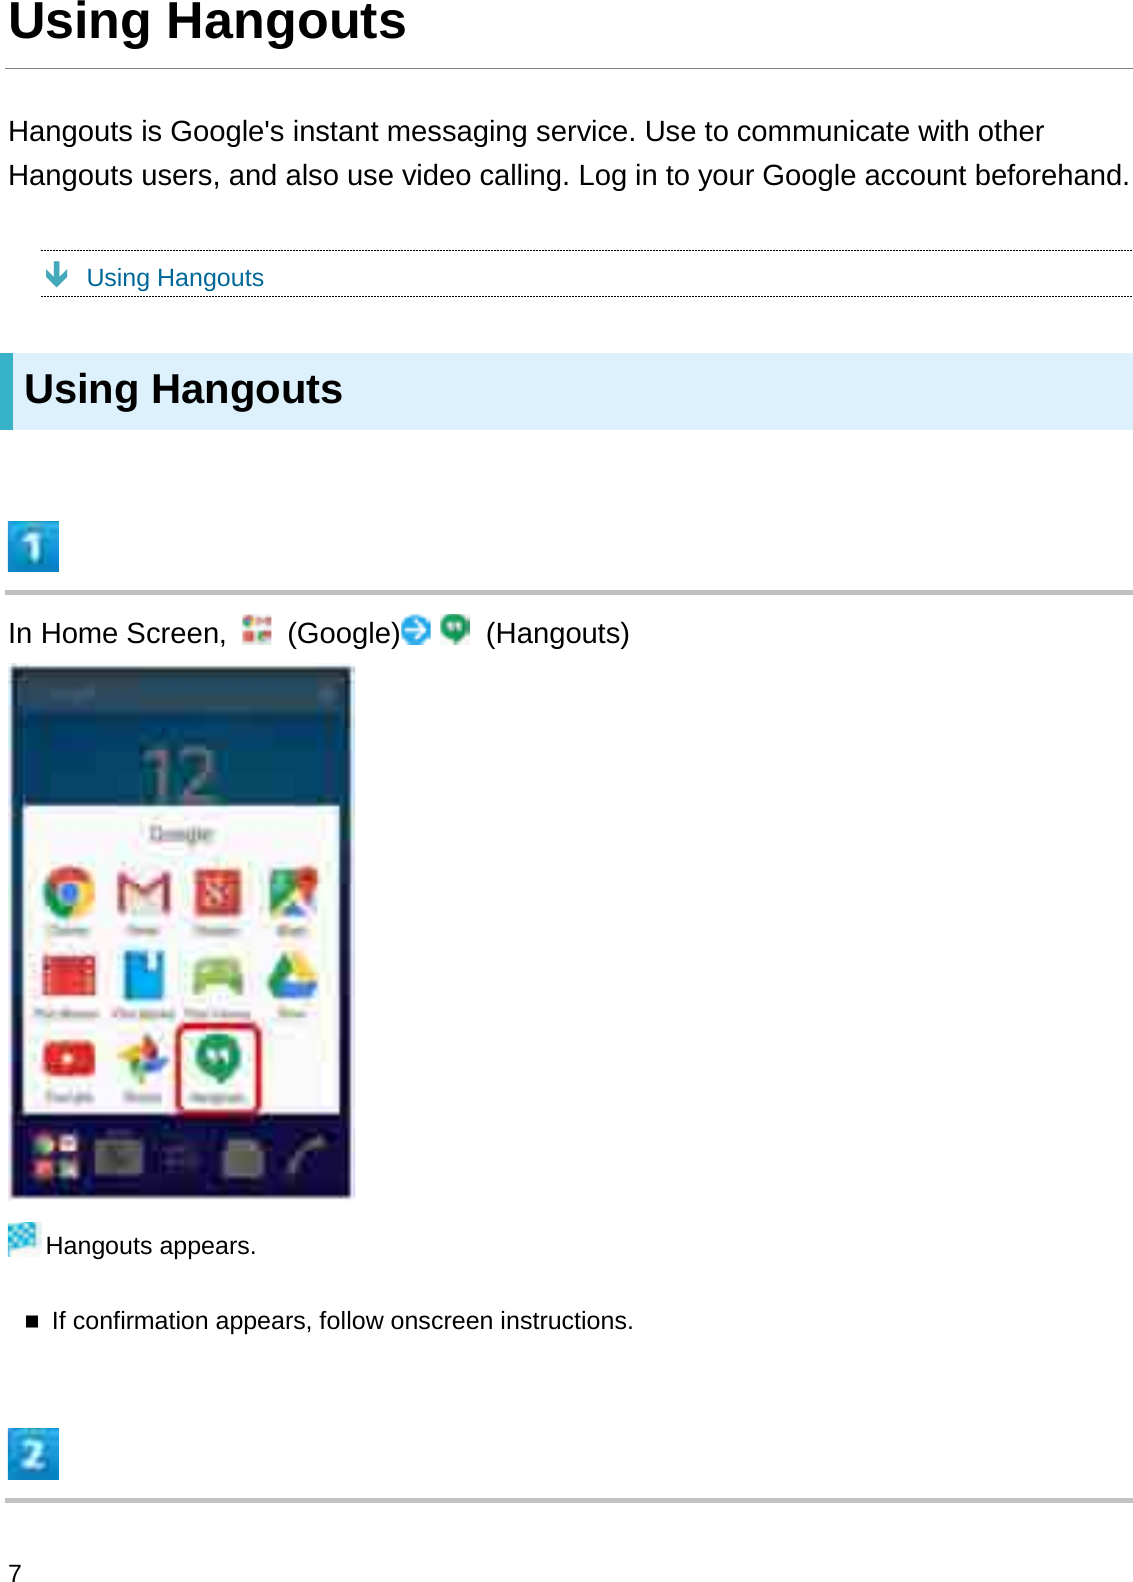 Using HangoutsHangouts is Google&apos;s instant messaging service. Use to communicate with other Hangouts users, and also use video calling. Log in to your Google account beforehand.ÐUsing HangoutsUsing HangoutsIn Home Screen,  (Google) (Hangouts)Hangouts appears.If confirmation appears, follow onscreen instructions.7